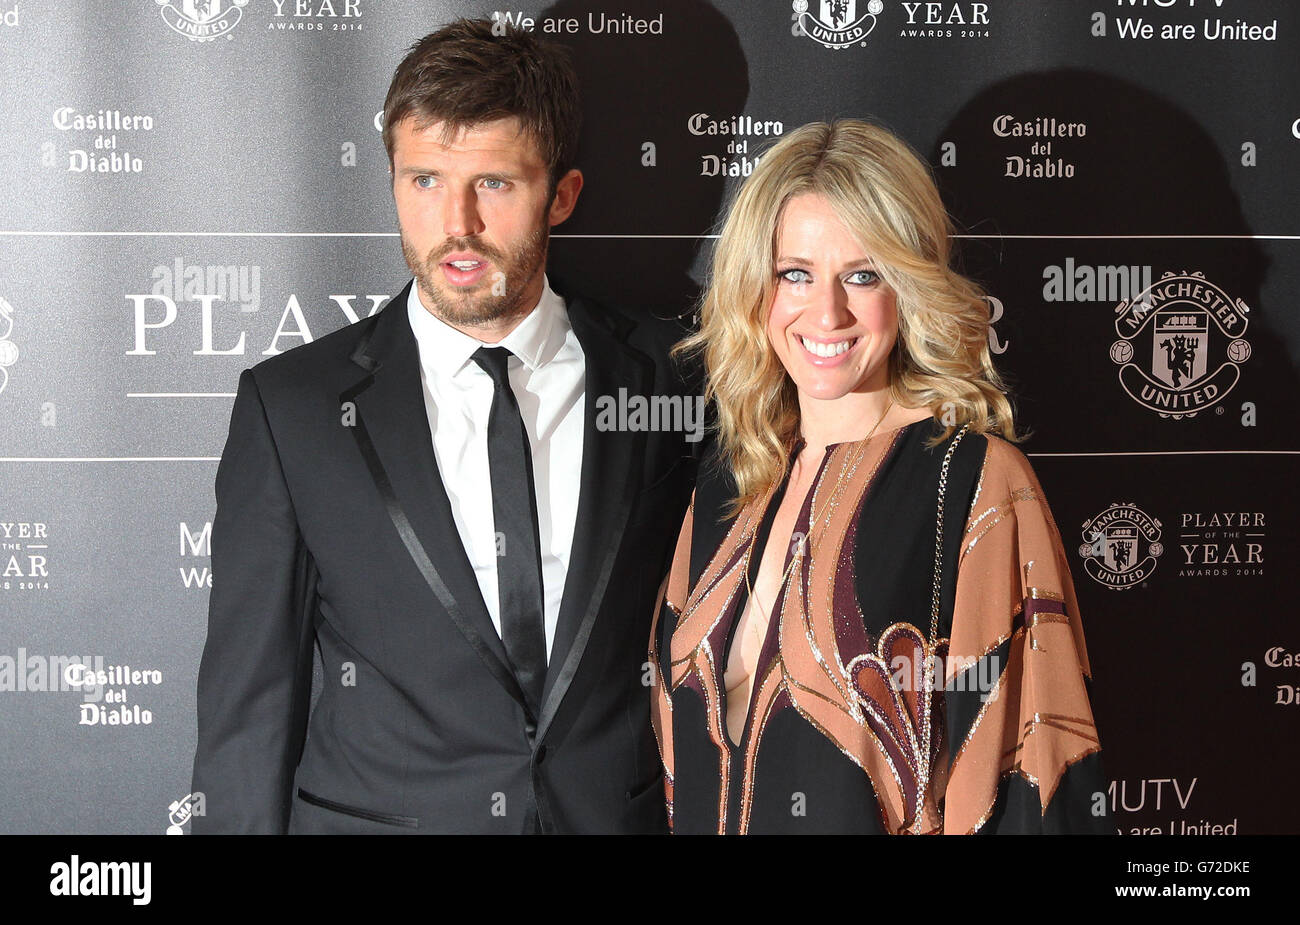 Soccer - 2014 Manchester United Player of the Year Awards - Arrivals - Old Trafford. Manchester United's Michael Carrick and wife Lisa arrive for the Manchester United Player of the year Awards at Old Trafford, Manchester. Stock Photo